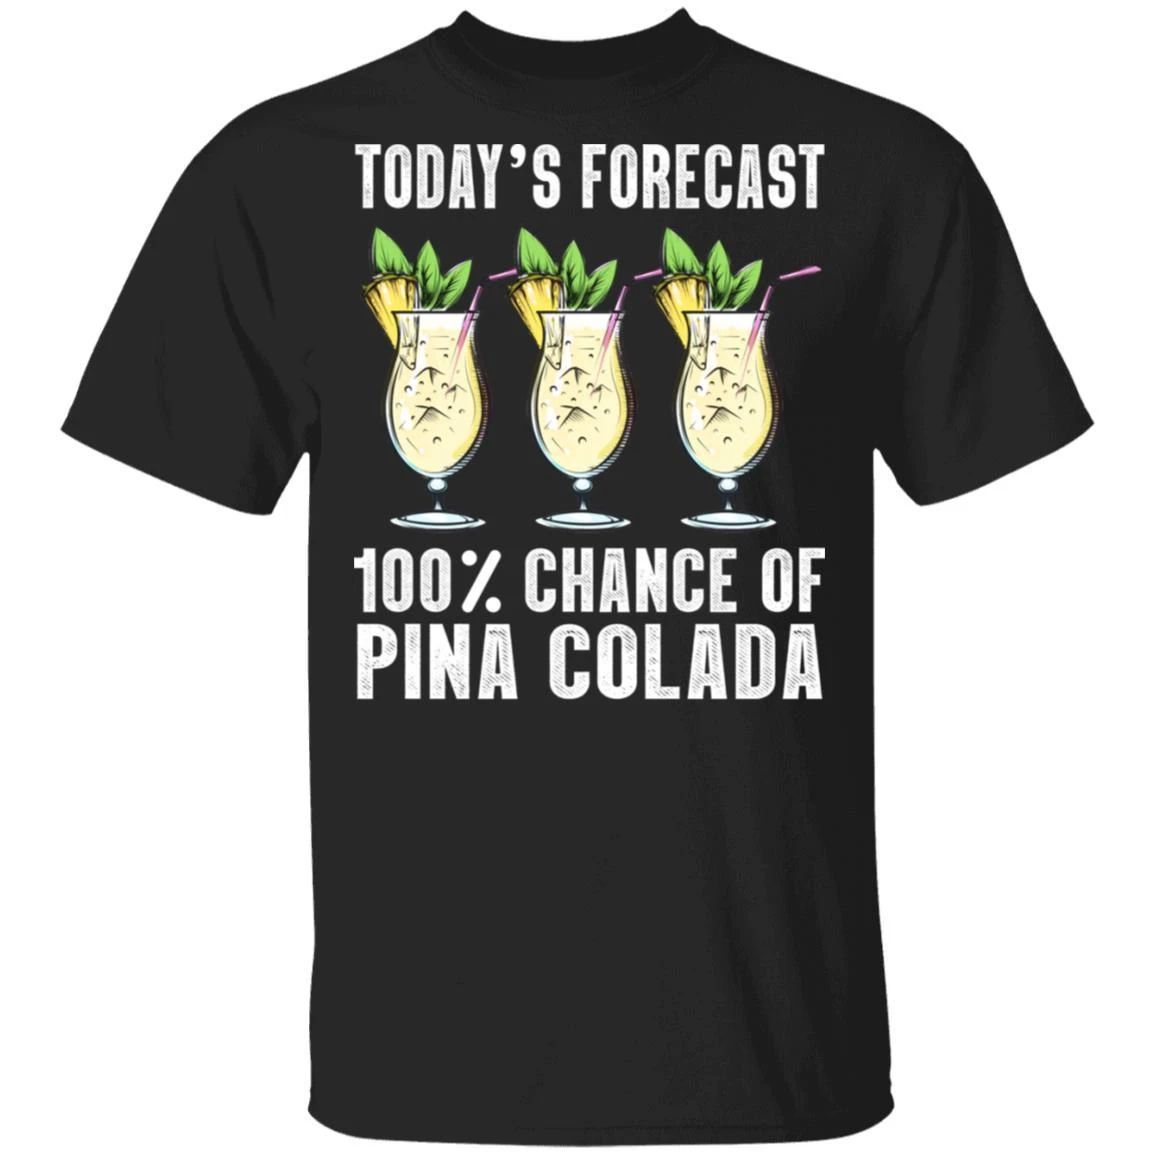 Today’s Forecast 100% Pina Colada T-shirt Cocktail Tee